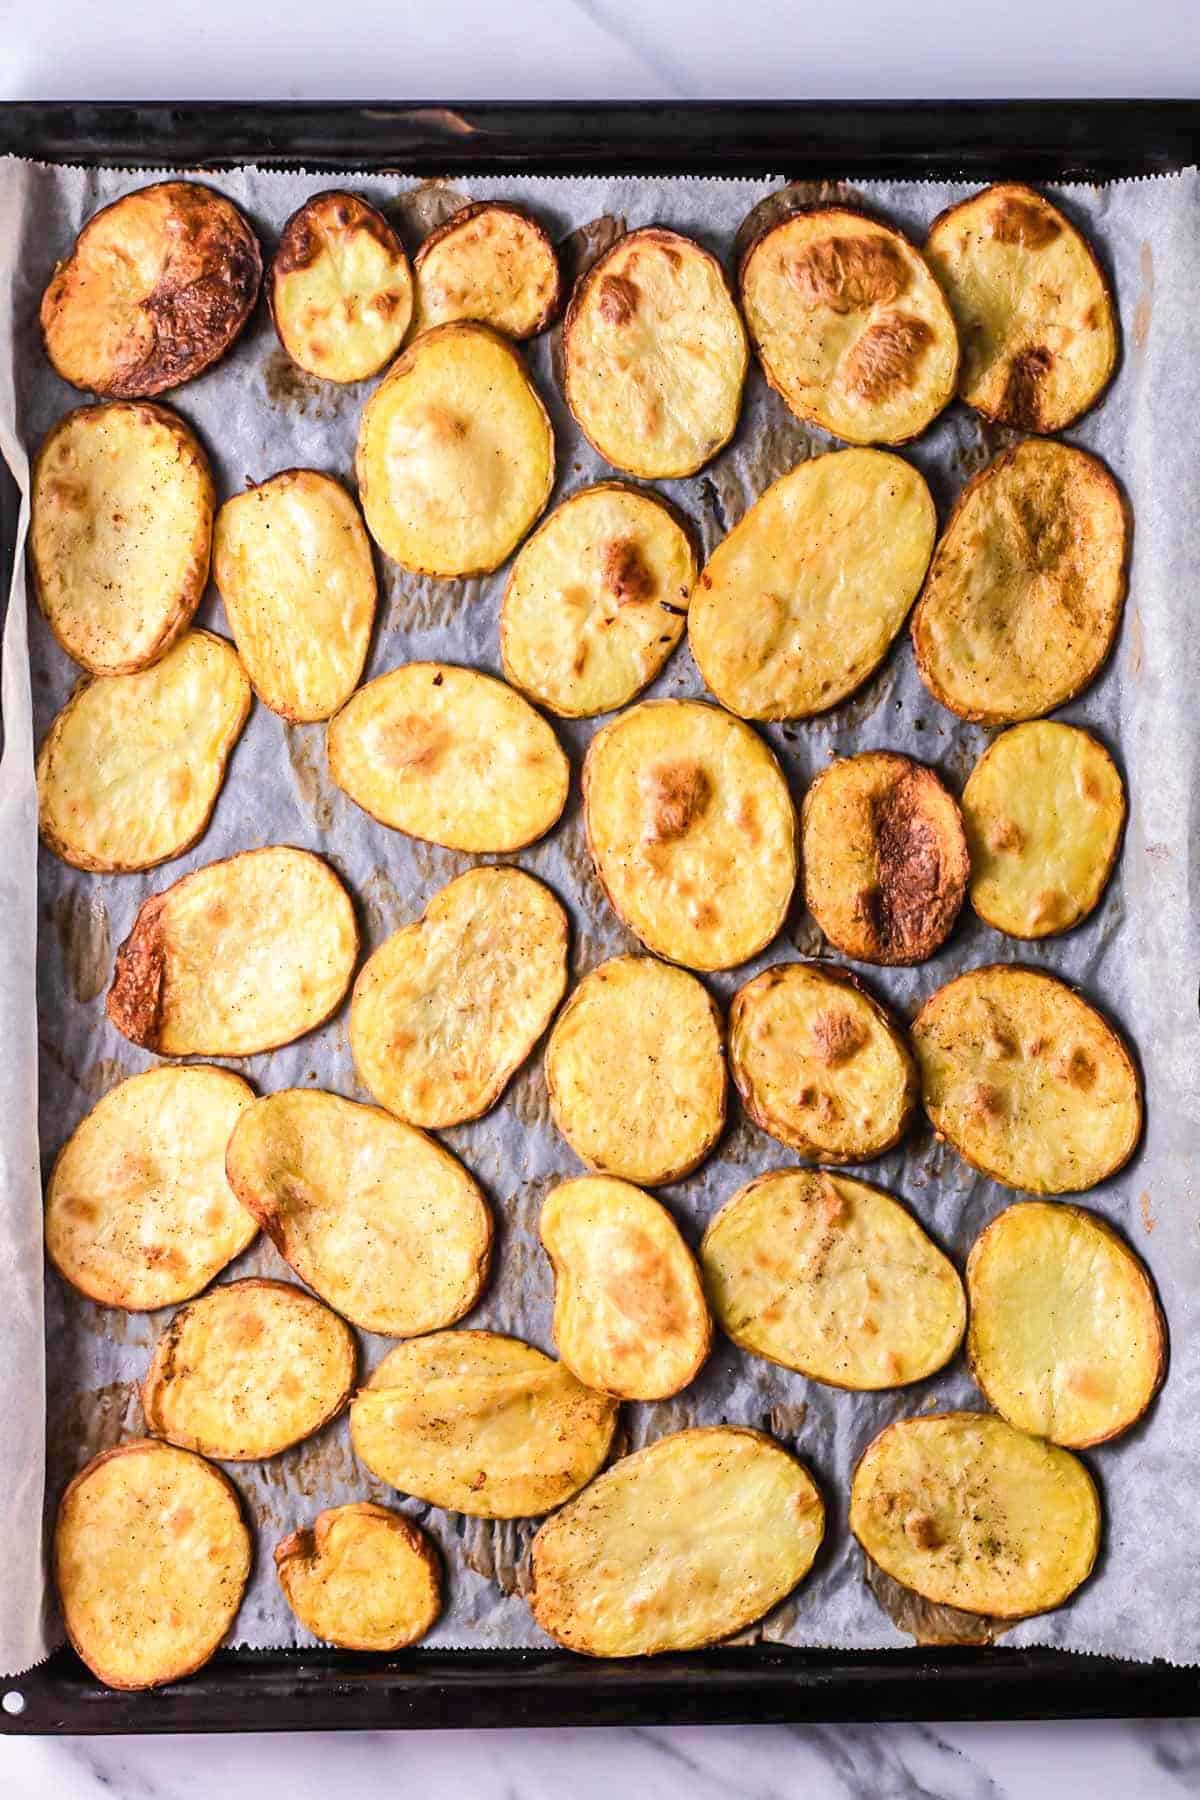 Top view photo of cooked potato slices on a baking sheet.